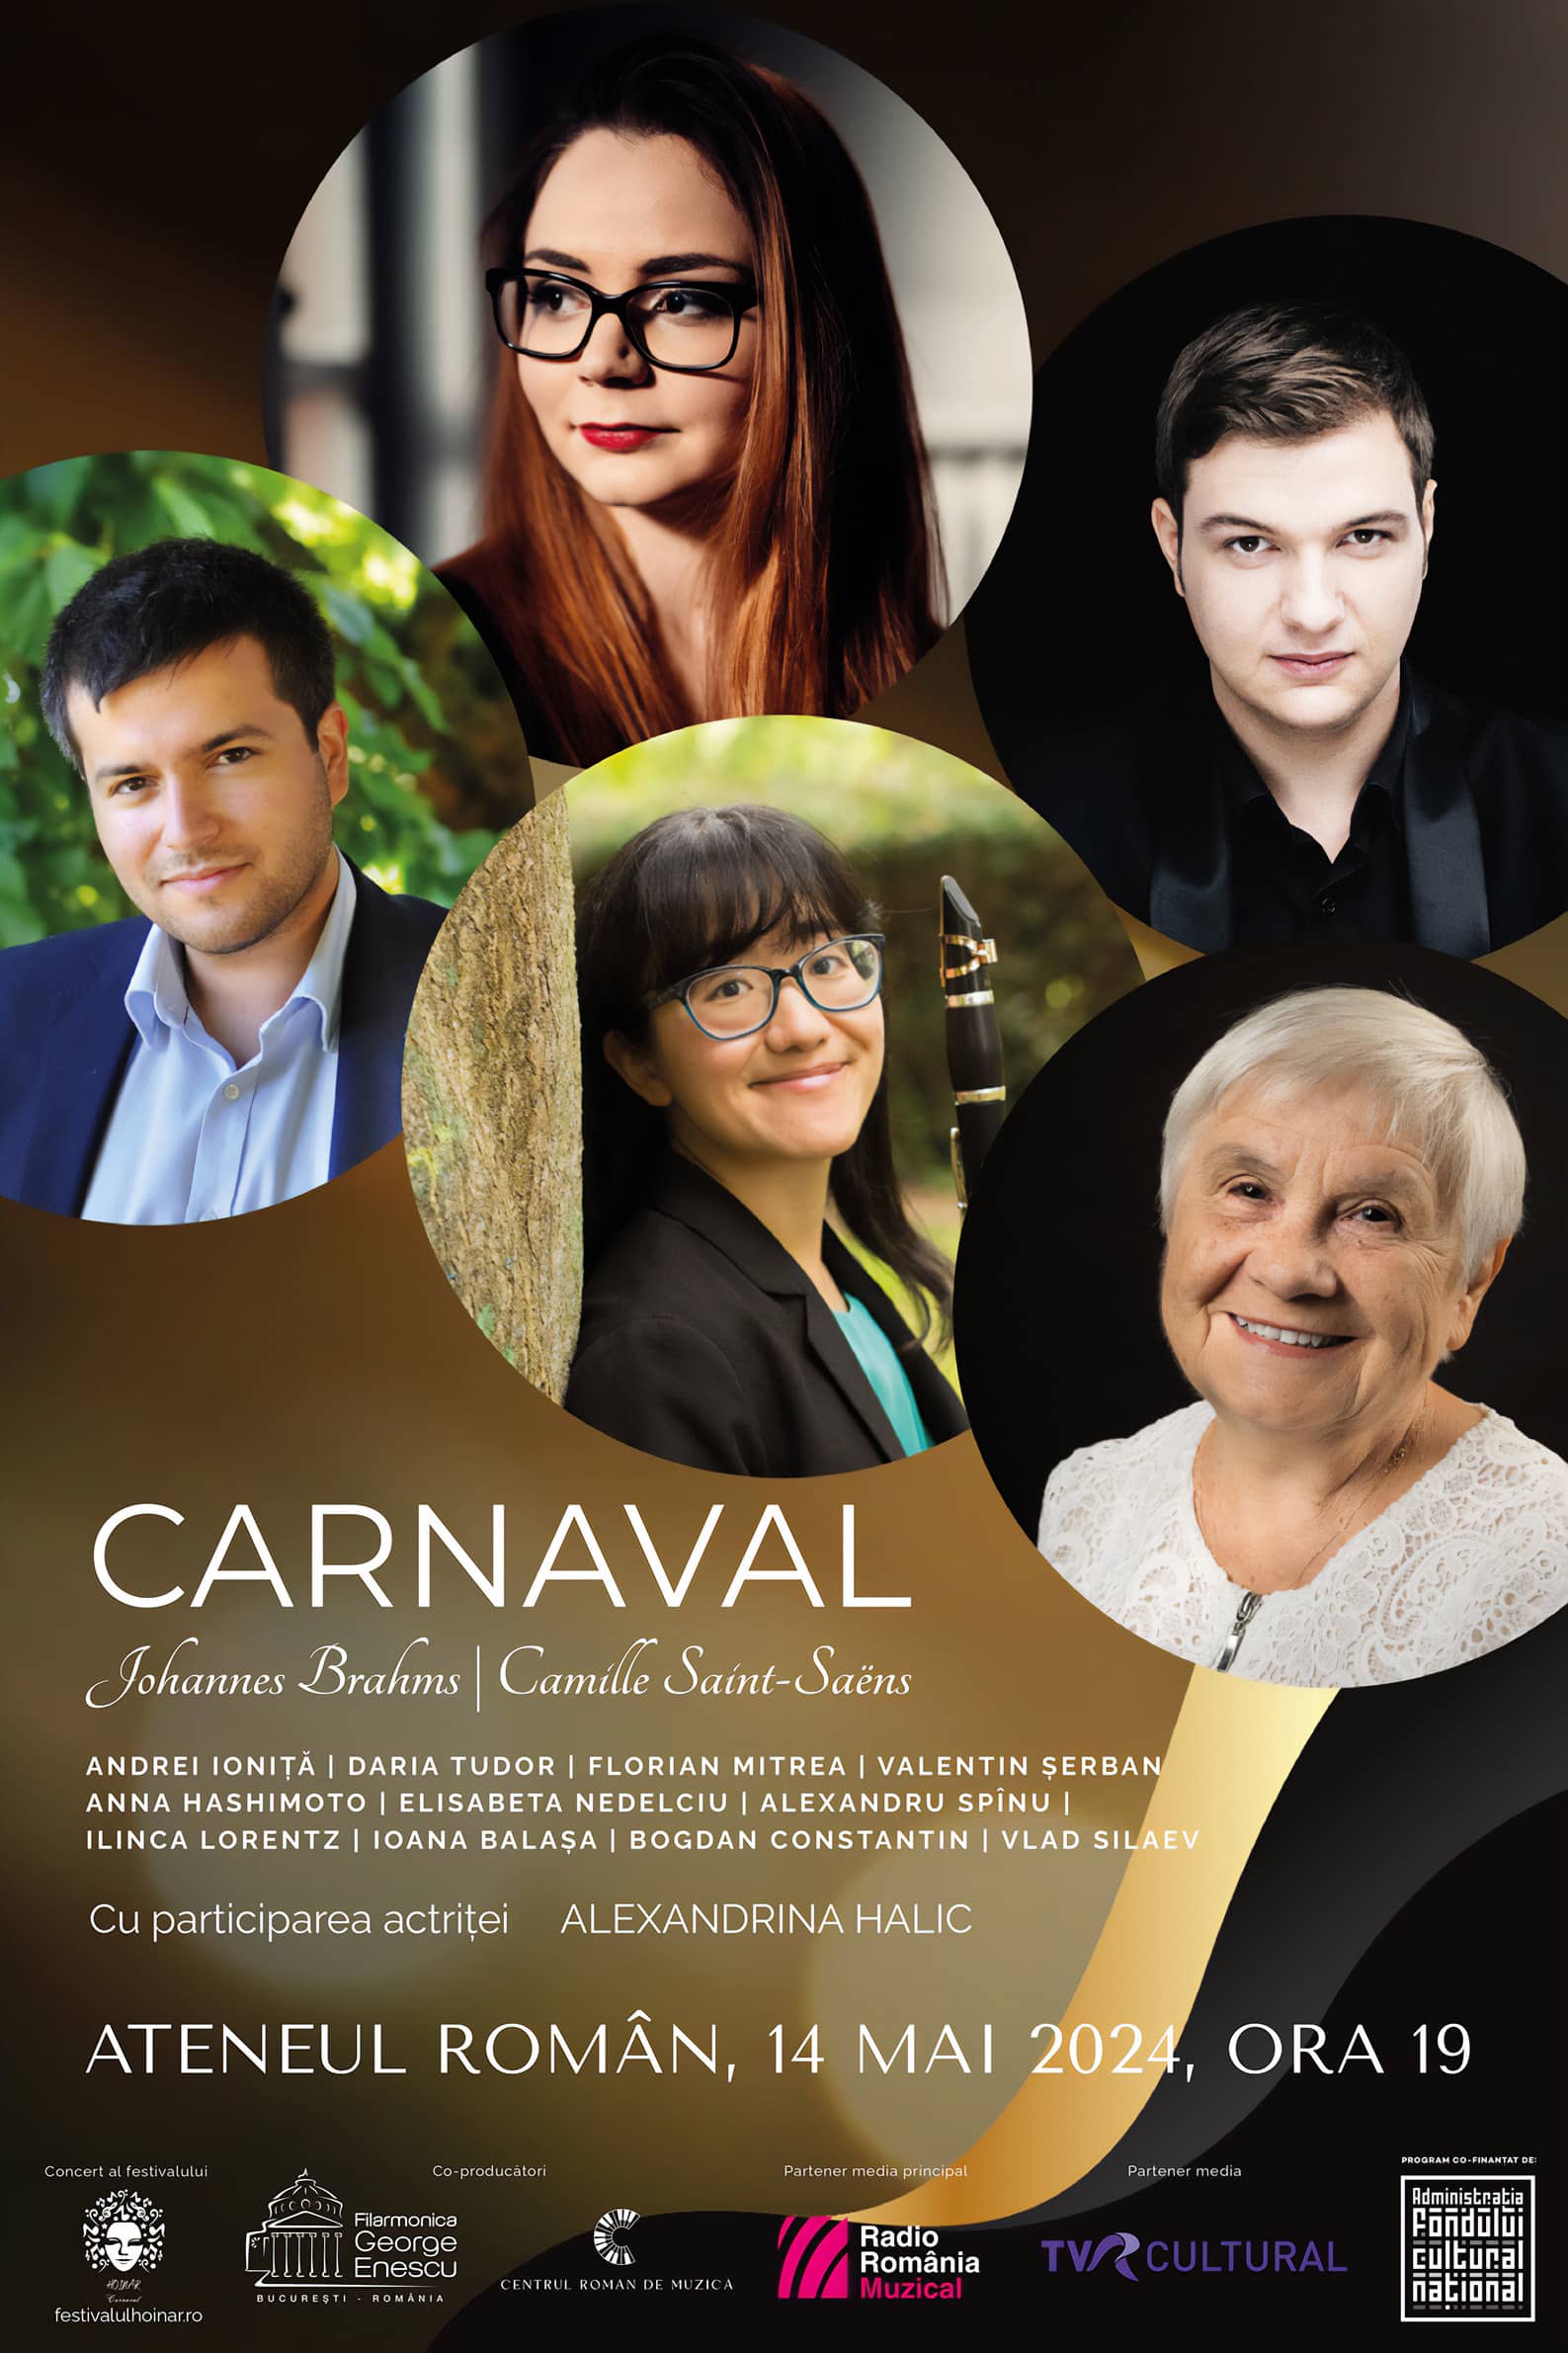 Poster for the Carnaval Concert in May 2024